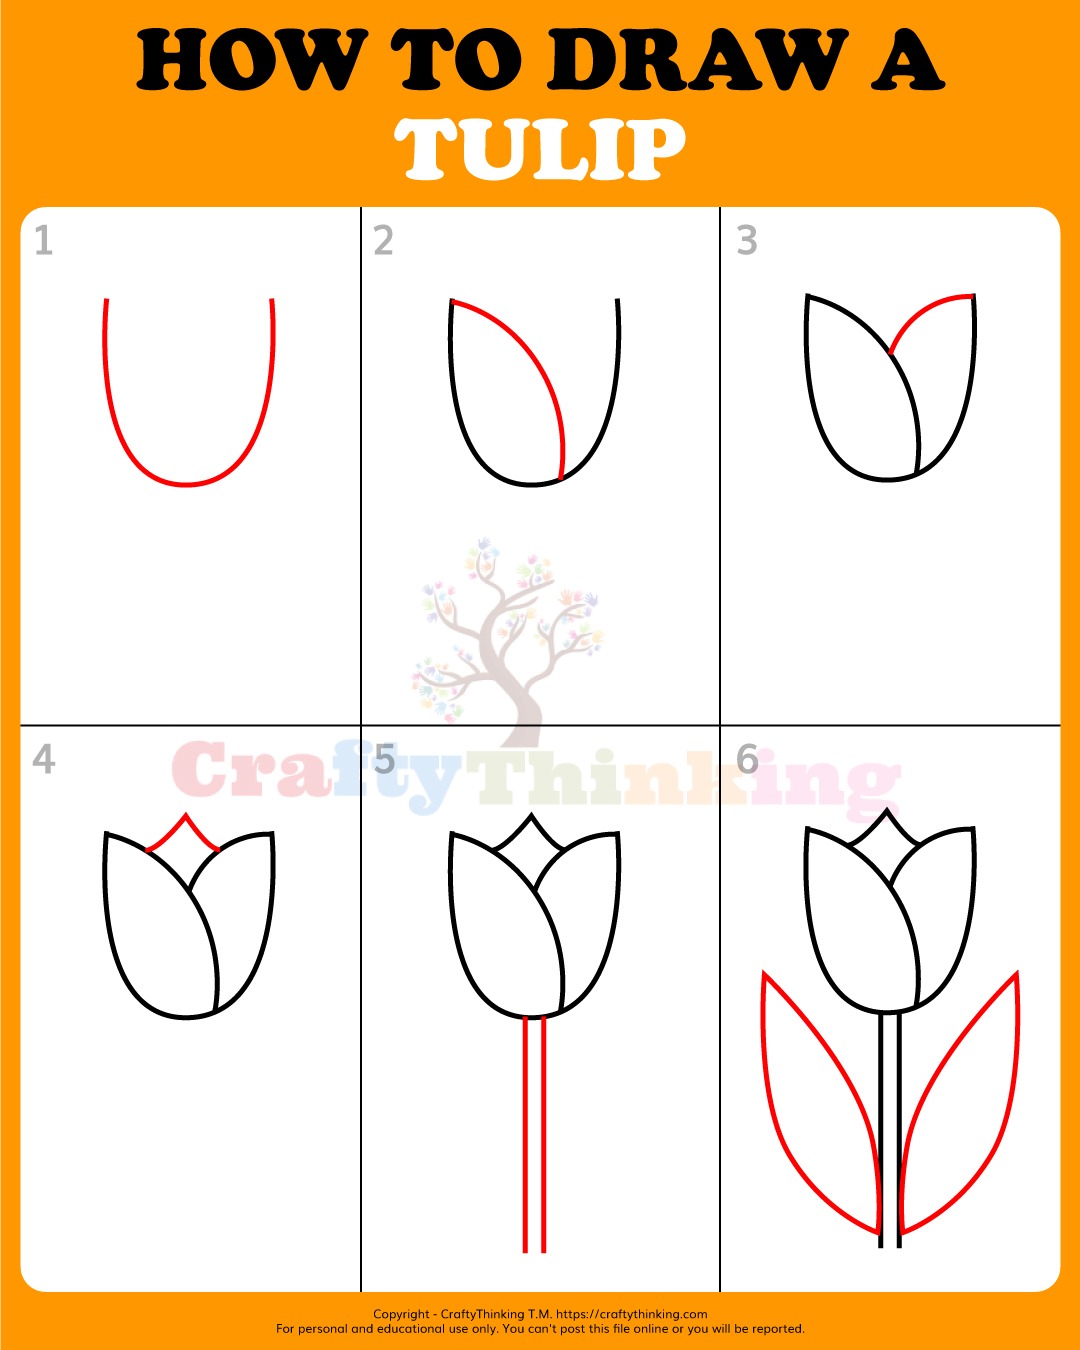 How To Draw A Tulip Step By Step Craftythinking - vrogue.co